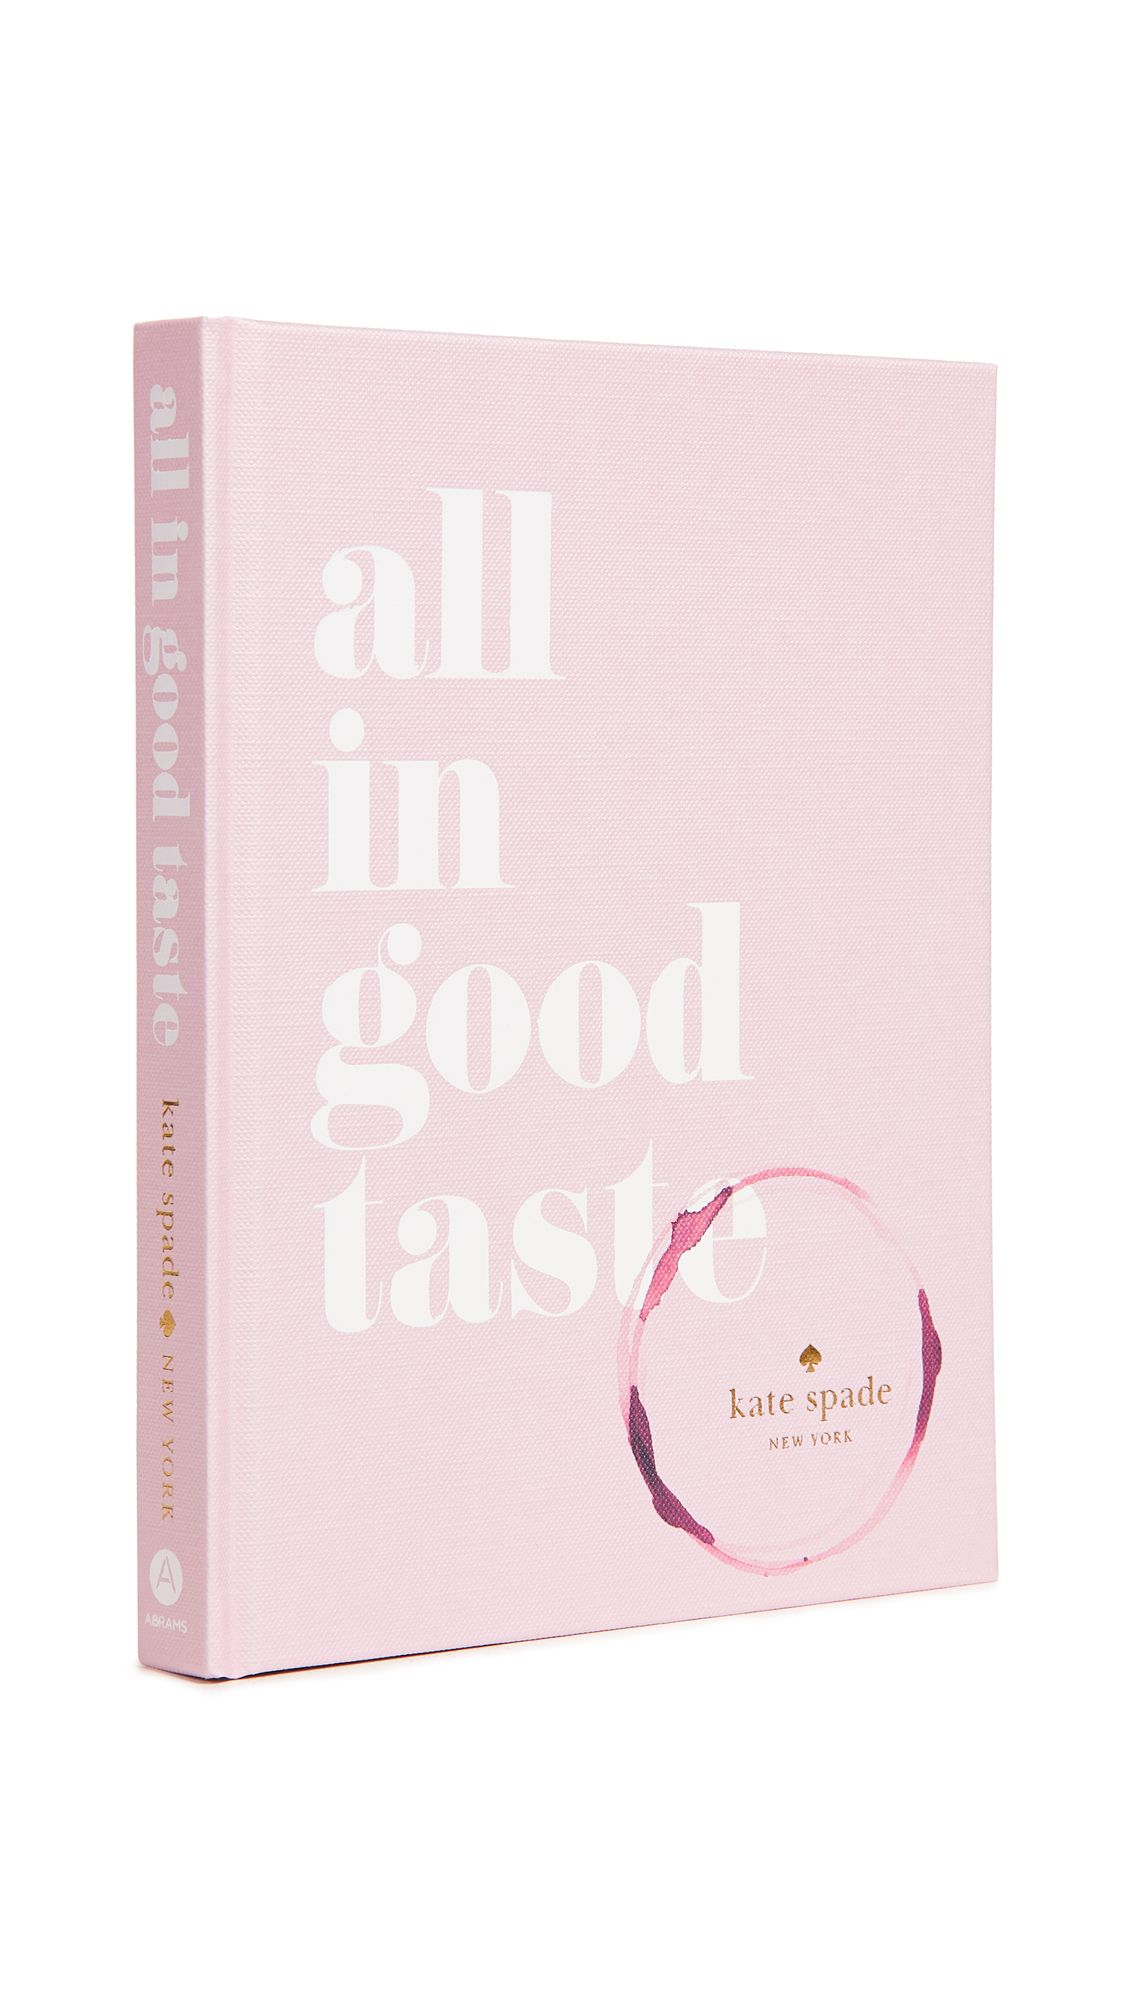 Books with Style All in Good Taste | Shopbop